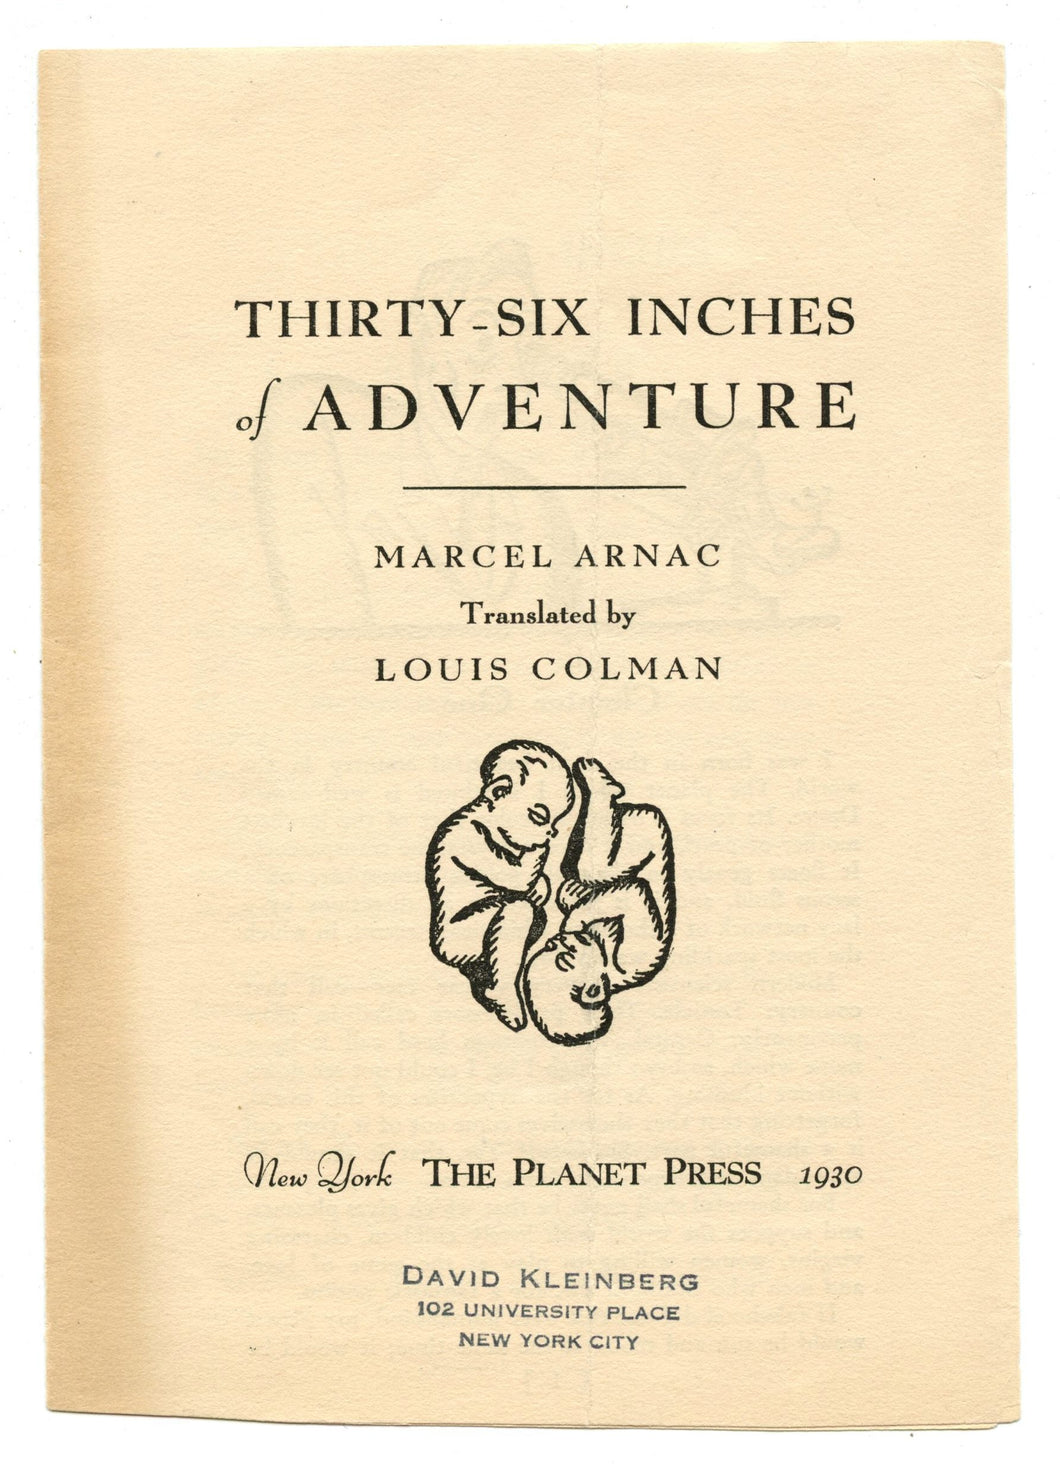 Prospectus and order form for Thirty-Six Inches of Adventure, by Marcel Arnac